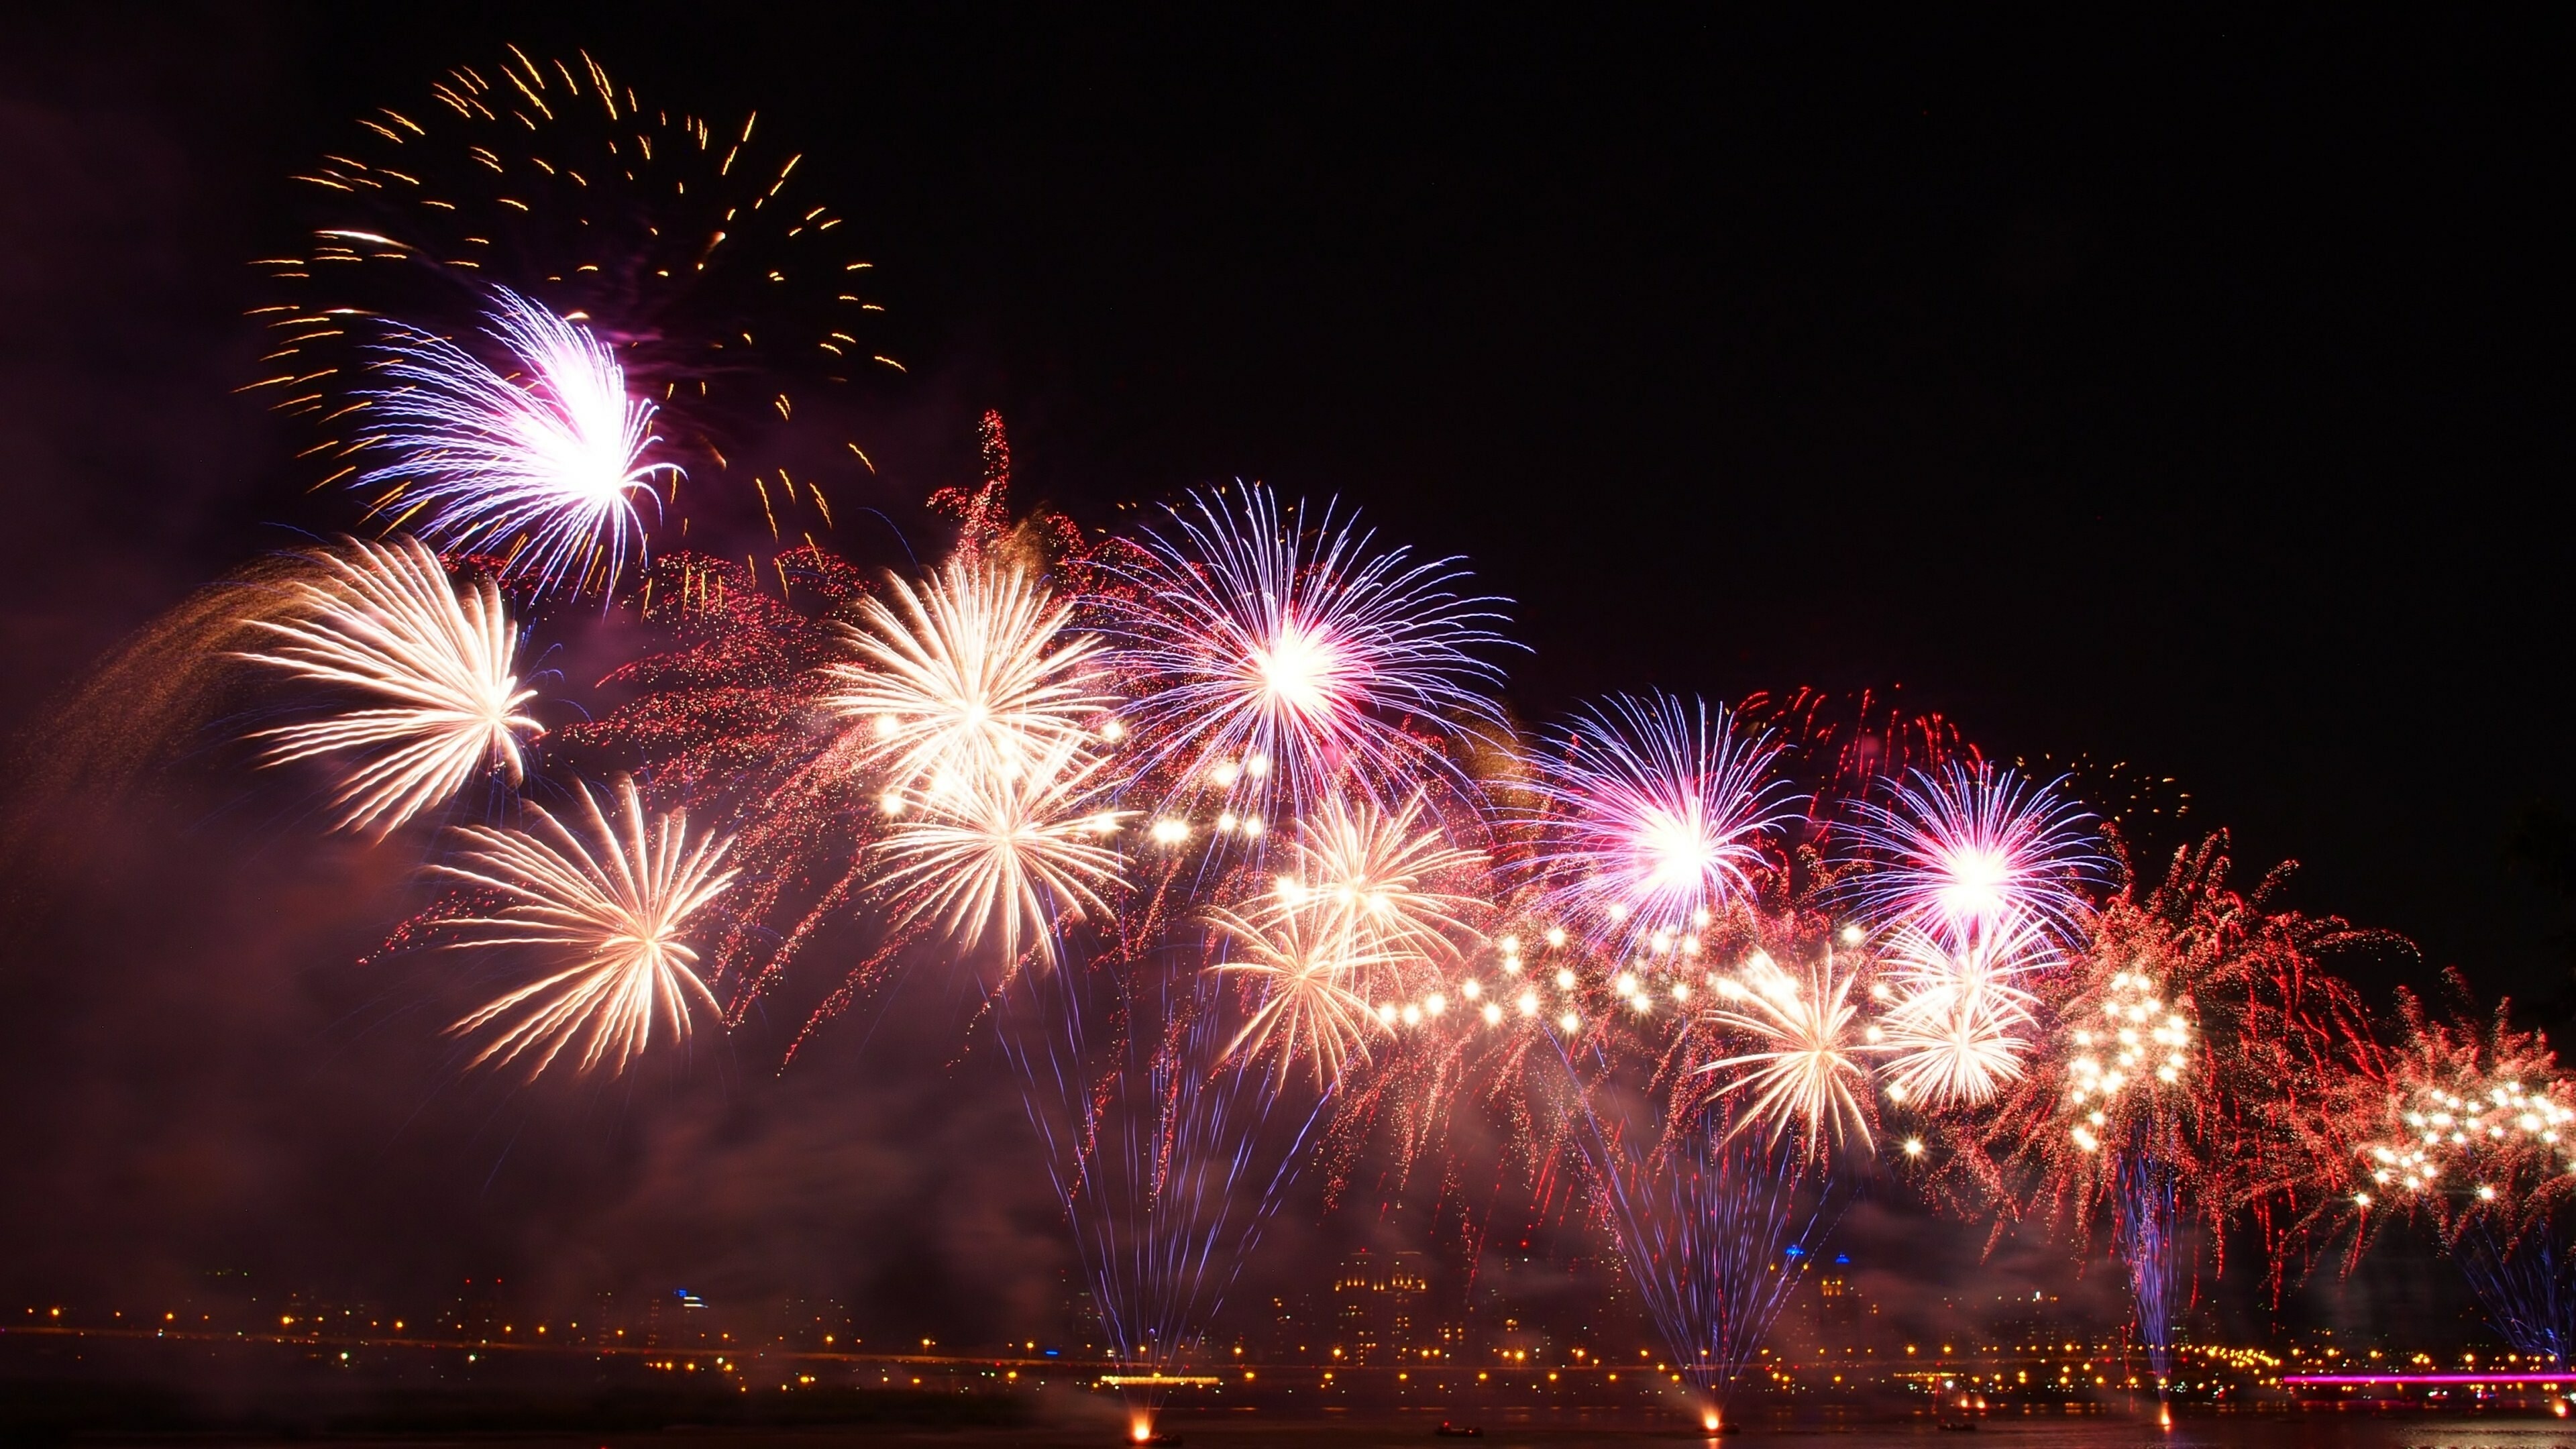 Firework: Pyrotechnics, The focal point of many cultural and religious celebrations. 3840x2160 4K Wallpaper.